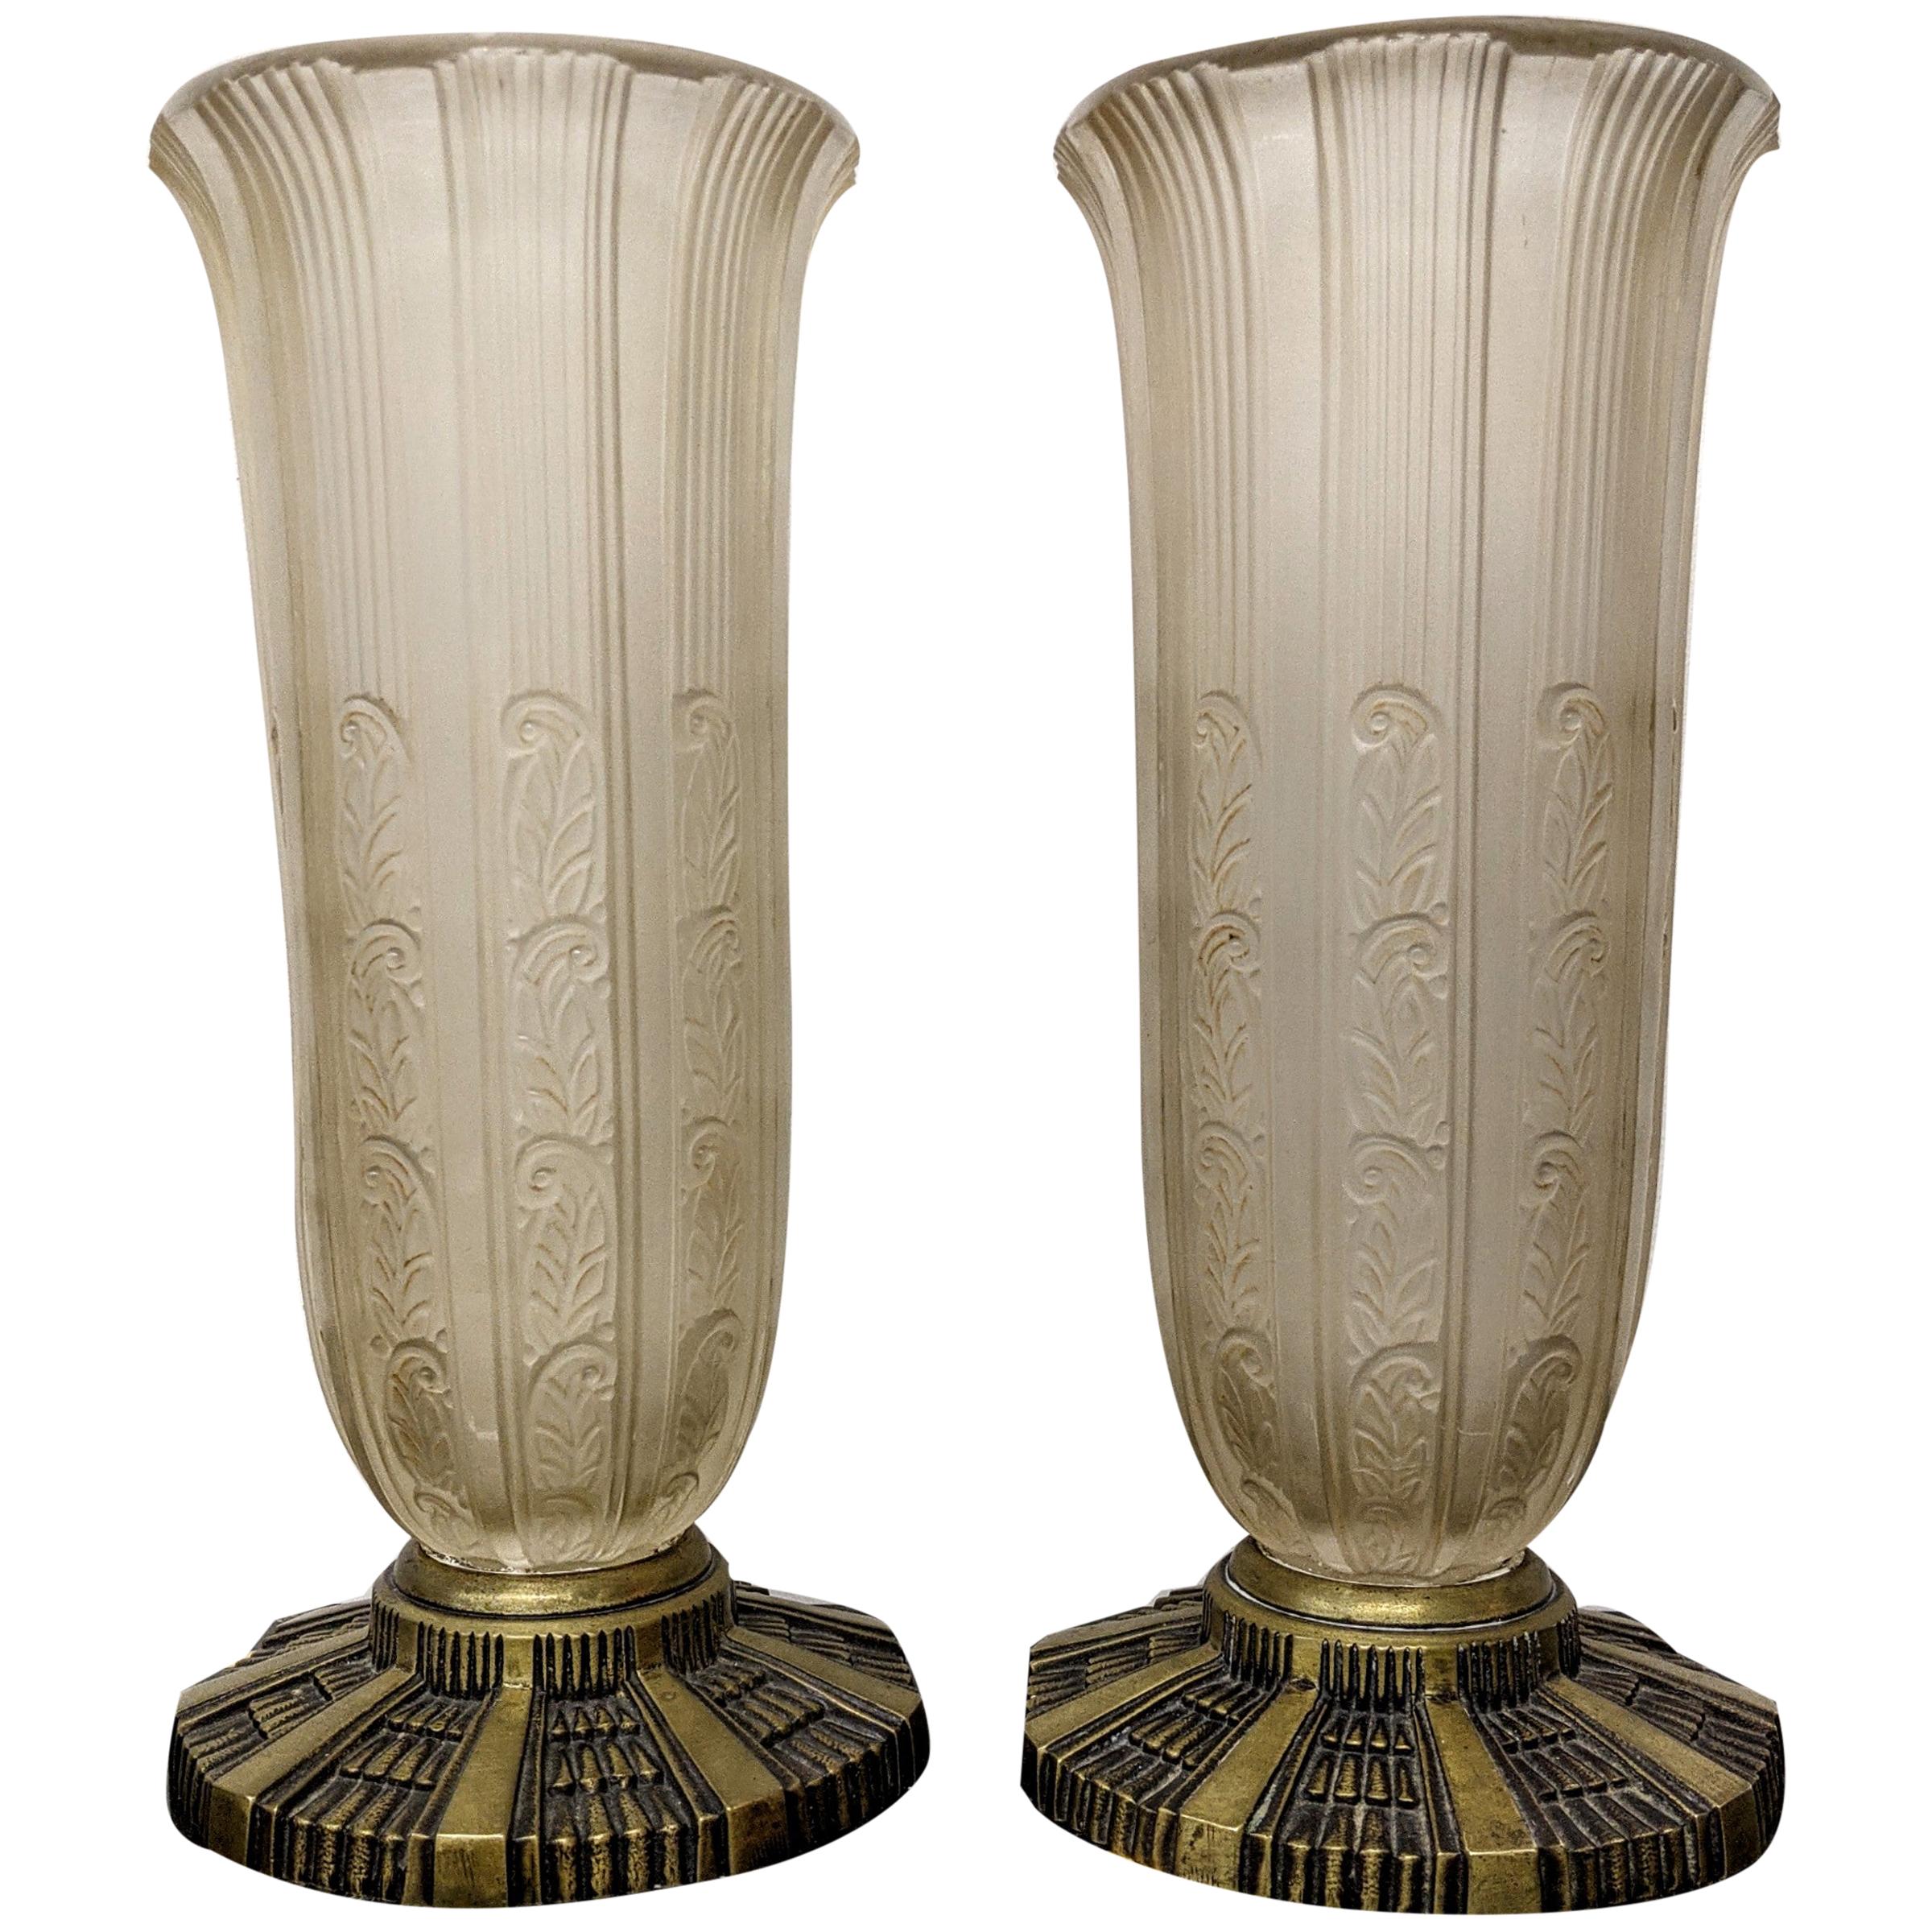 Pair of French Art Deco Glass Vases by Hettier & Vincent